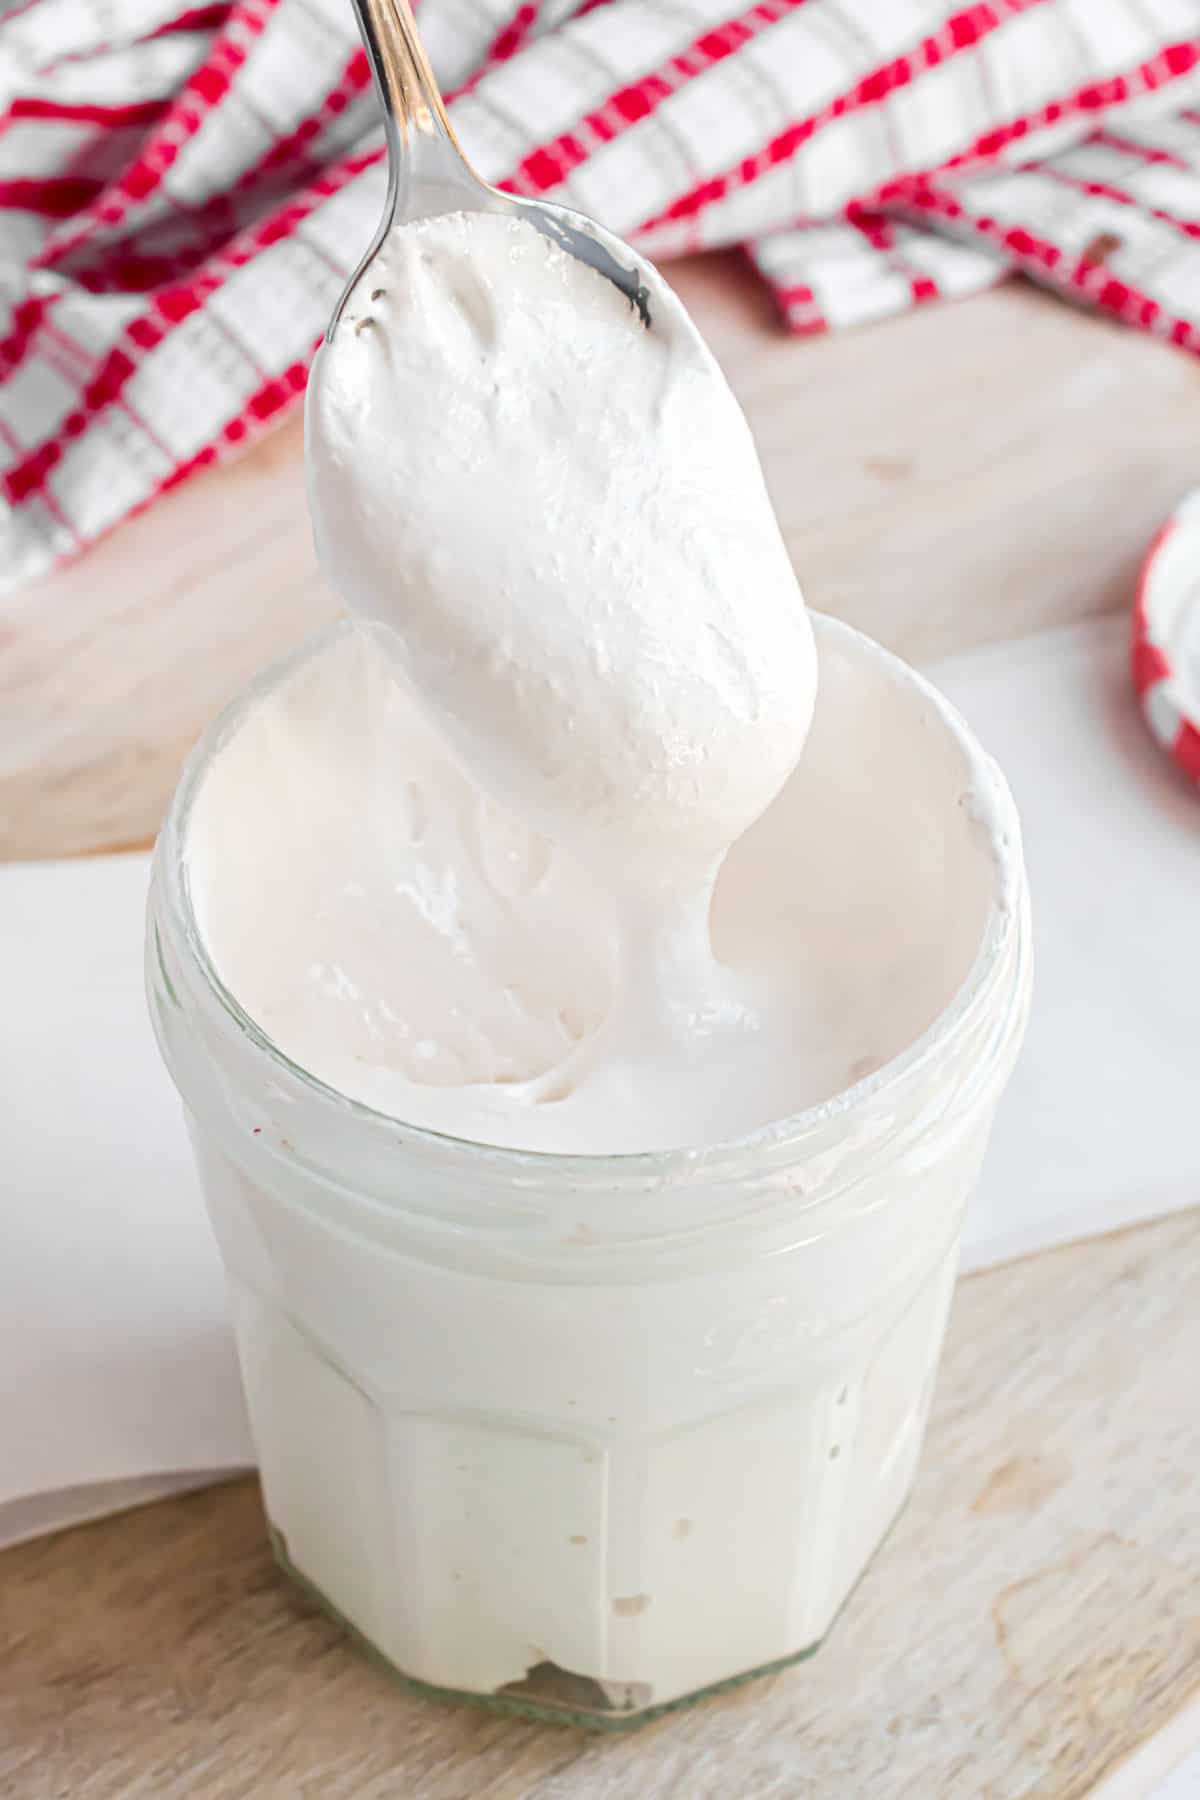 Homemade marshmallow fluff in a jar with a spoon.